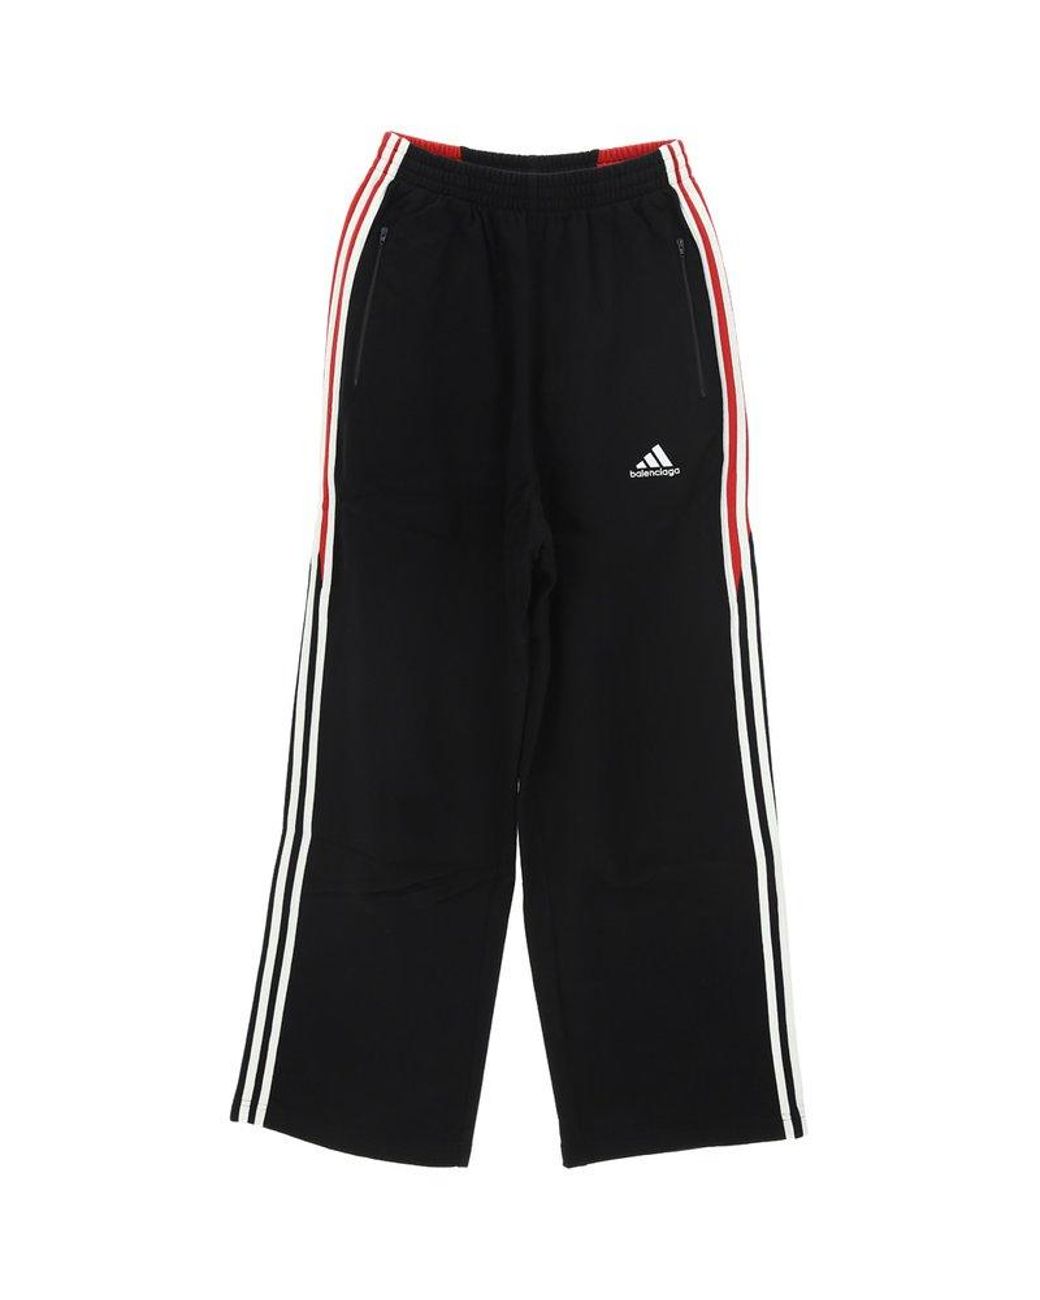 adidas Tapered Pants for Men for sale | eBay